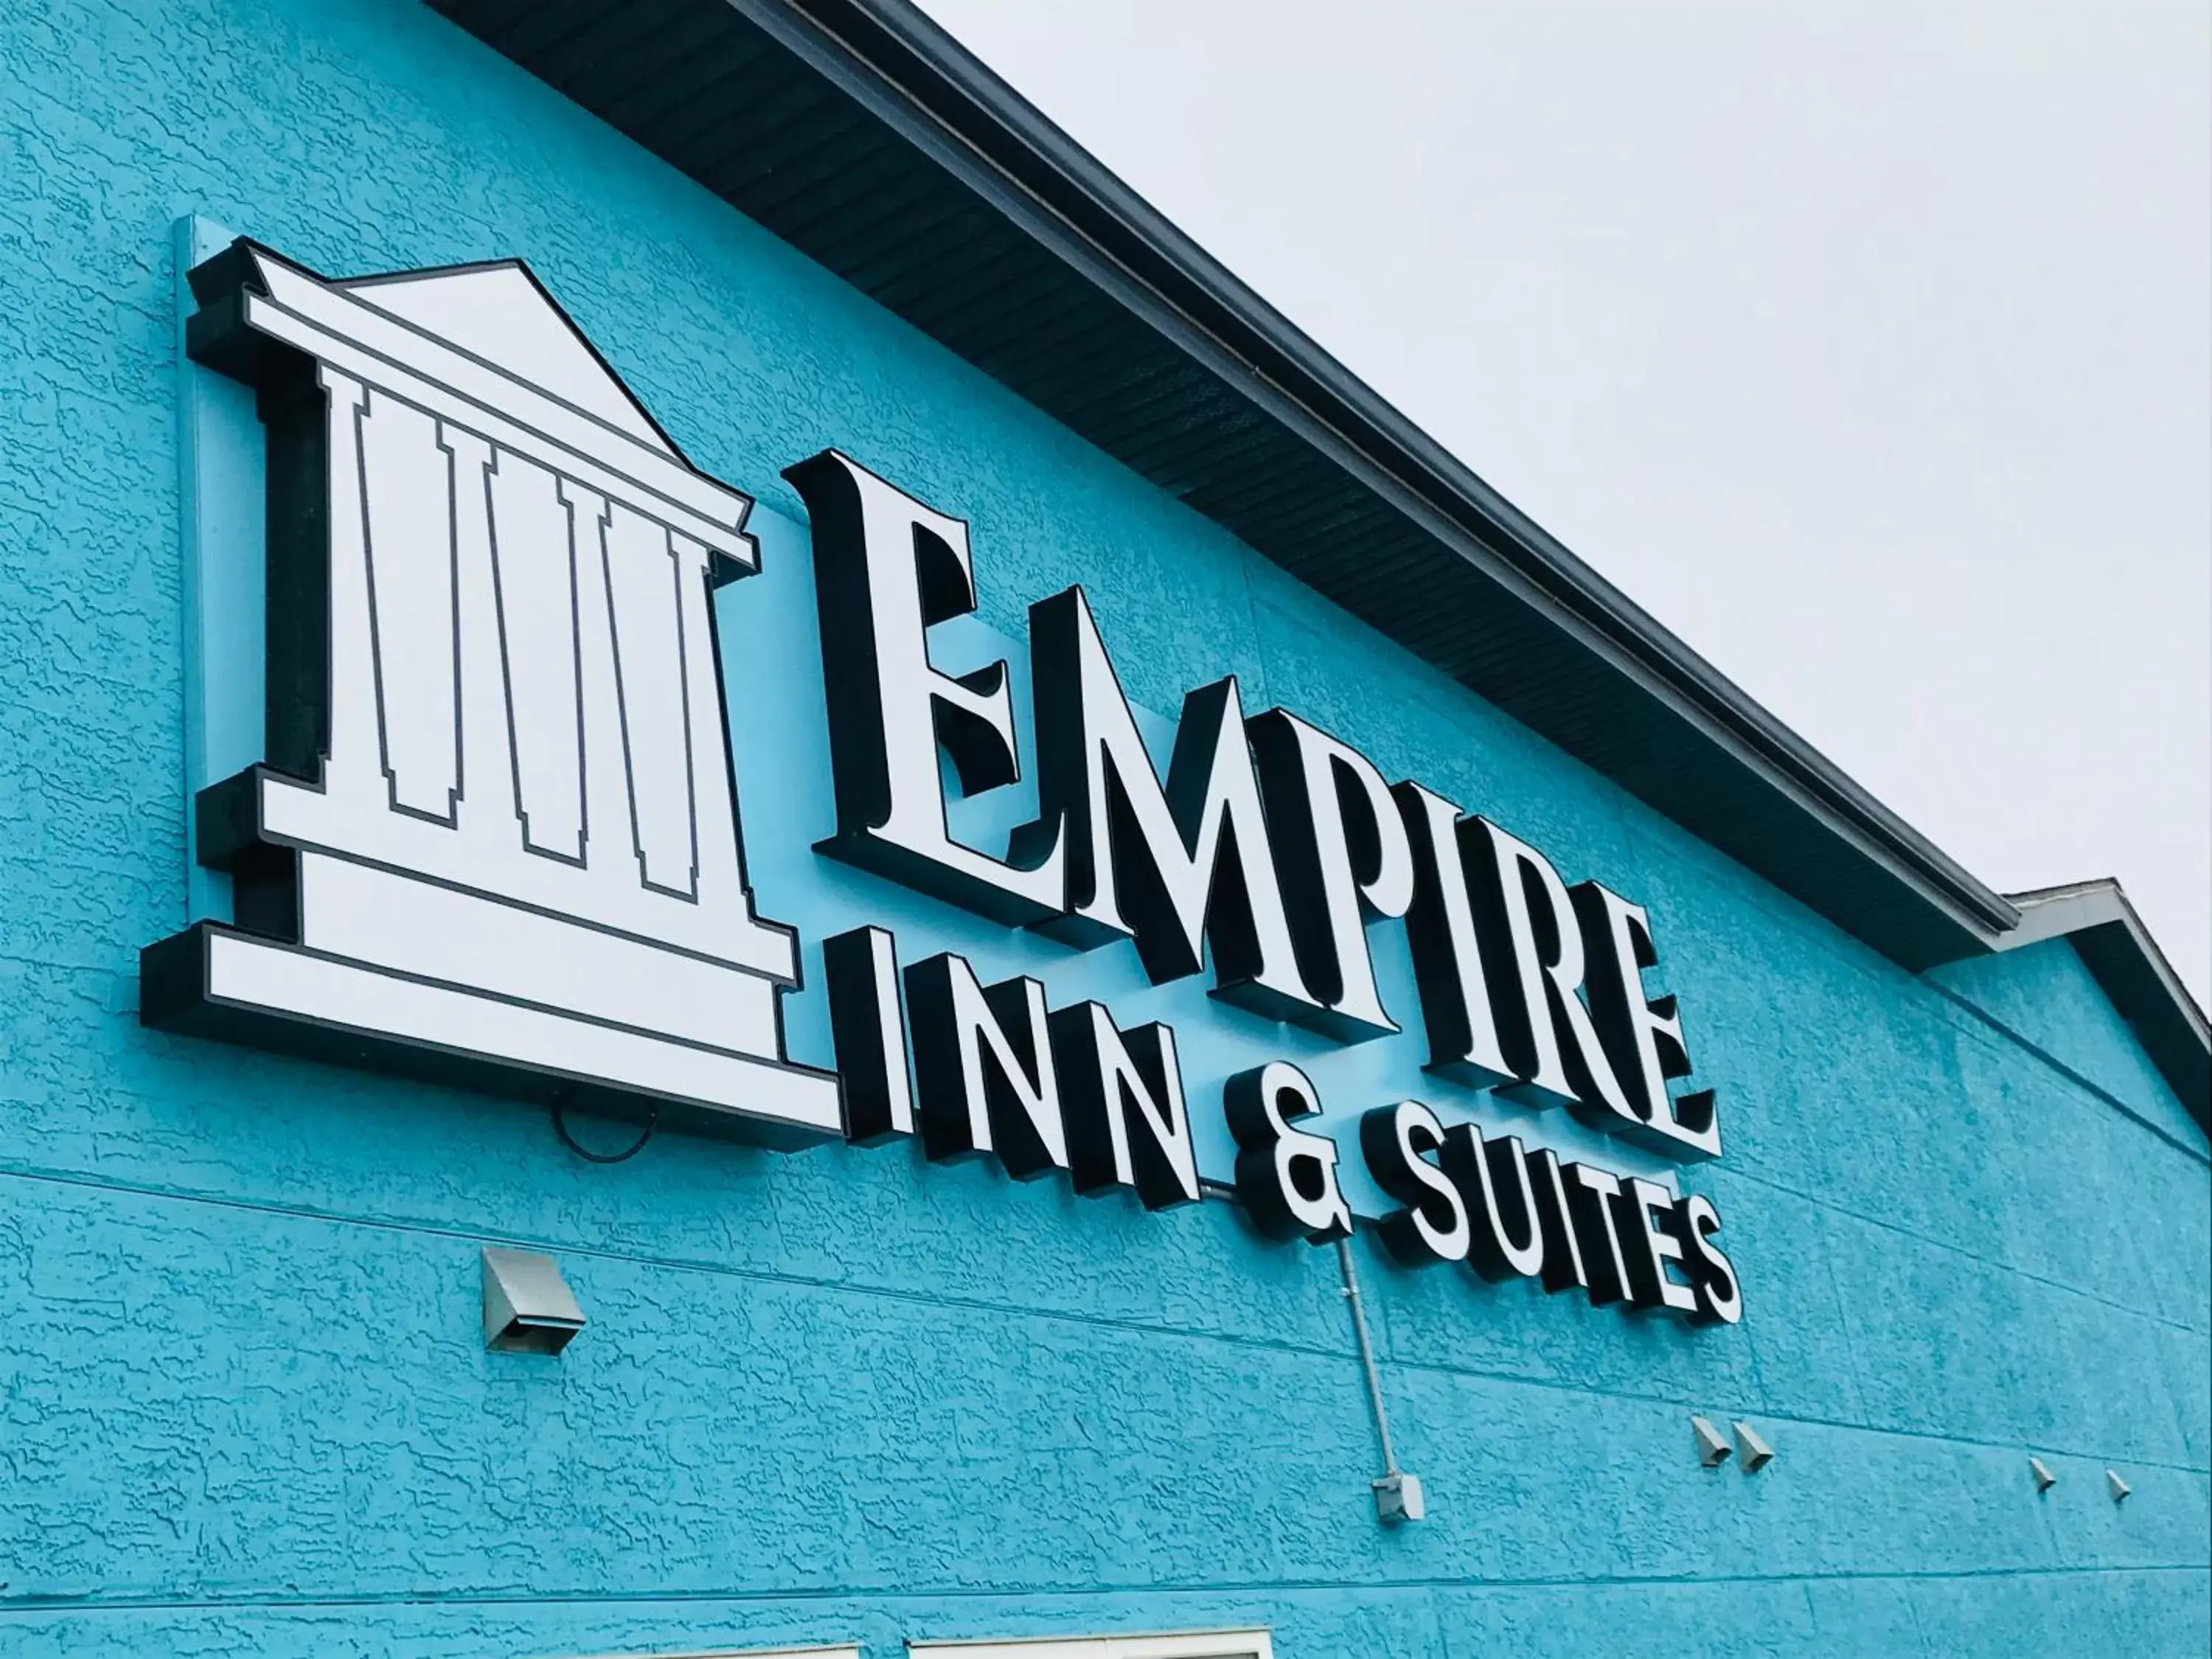 Property building in Empire Inn & Suites